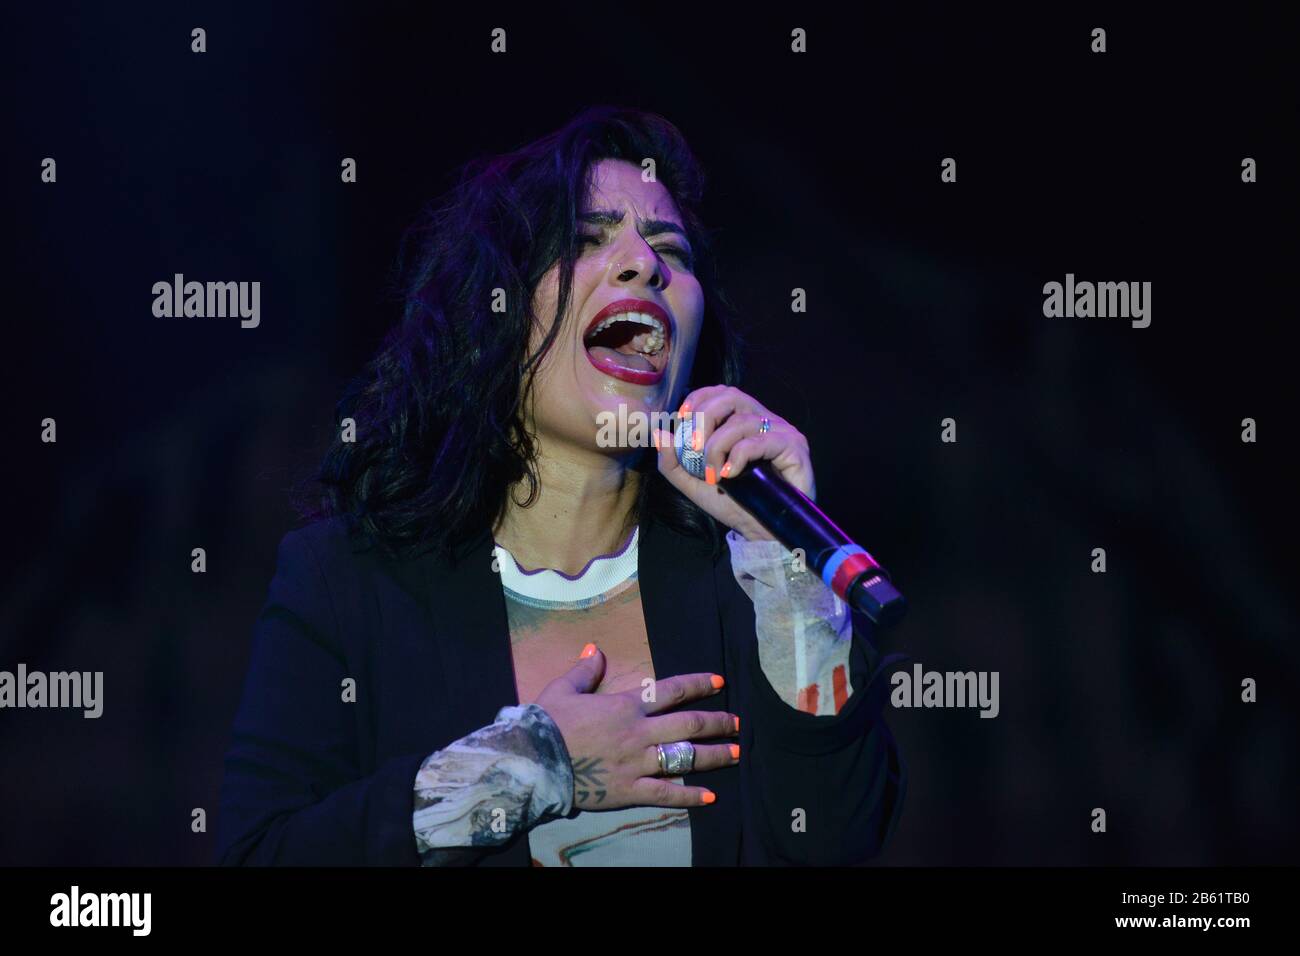 Chilean singer Ana Tijoux performs live on stage during the Tiempo de Mujeres Music Festival at Zocalo in Mexico City. Stock Photo